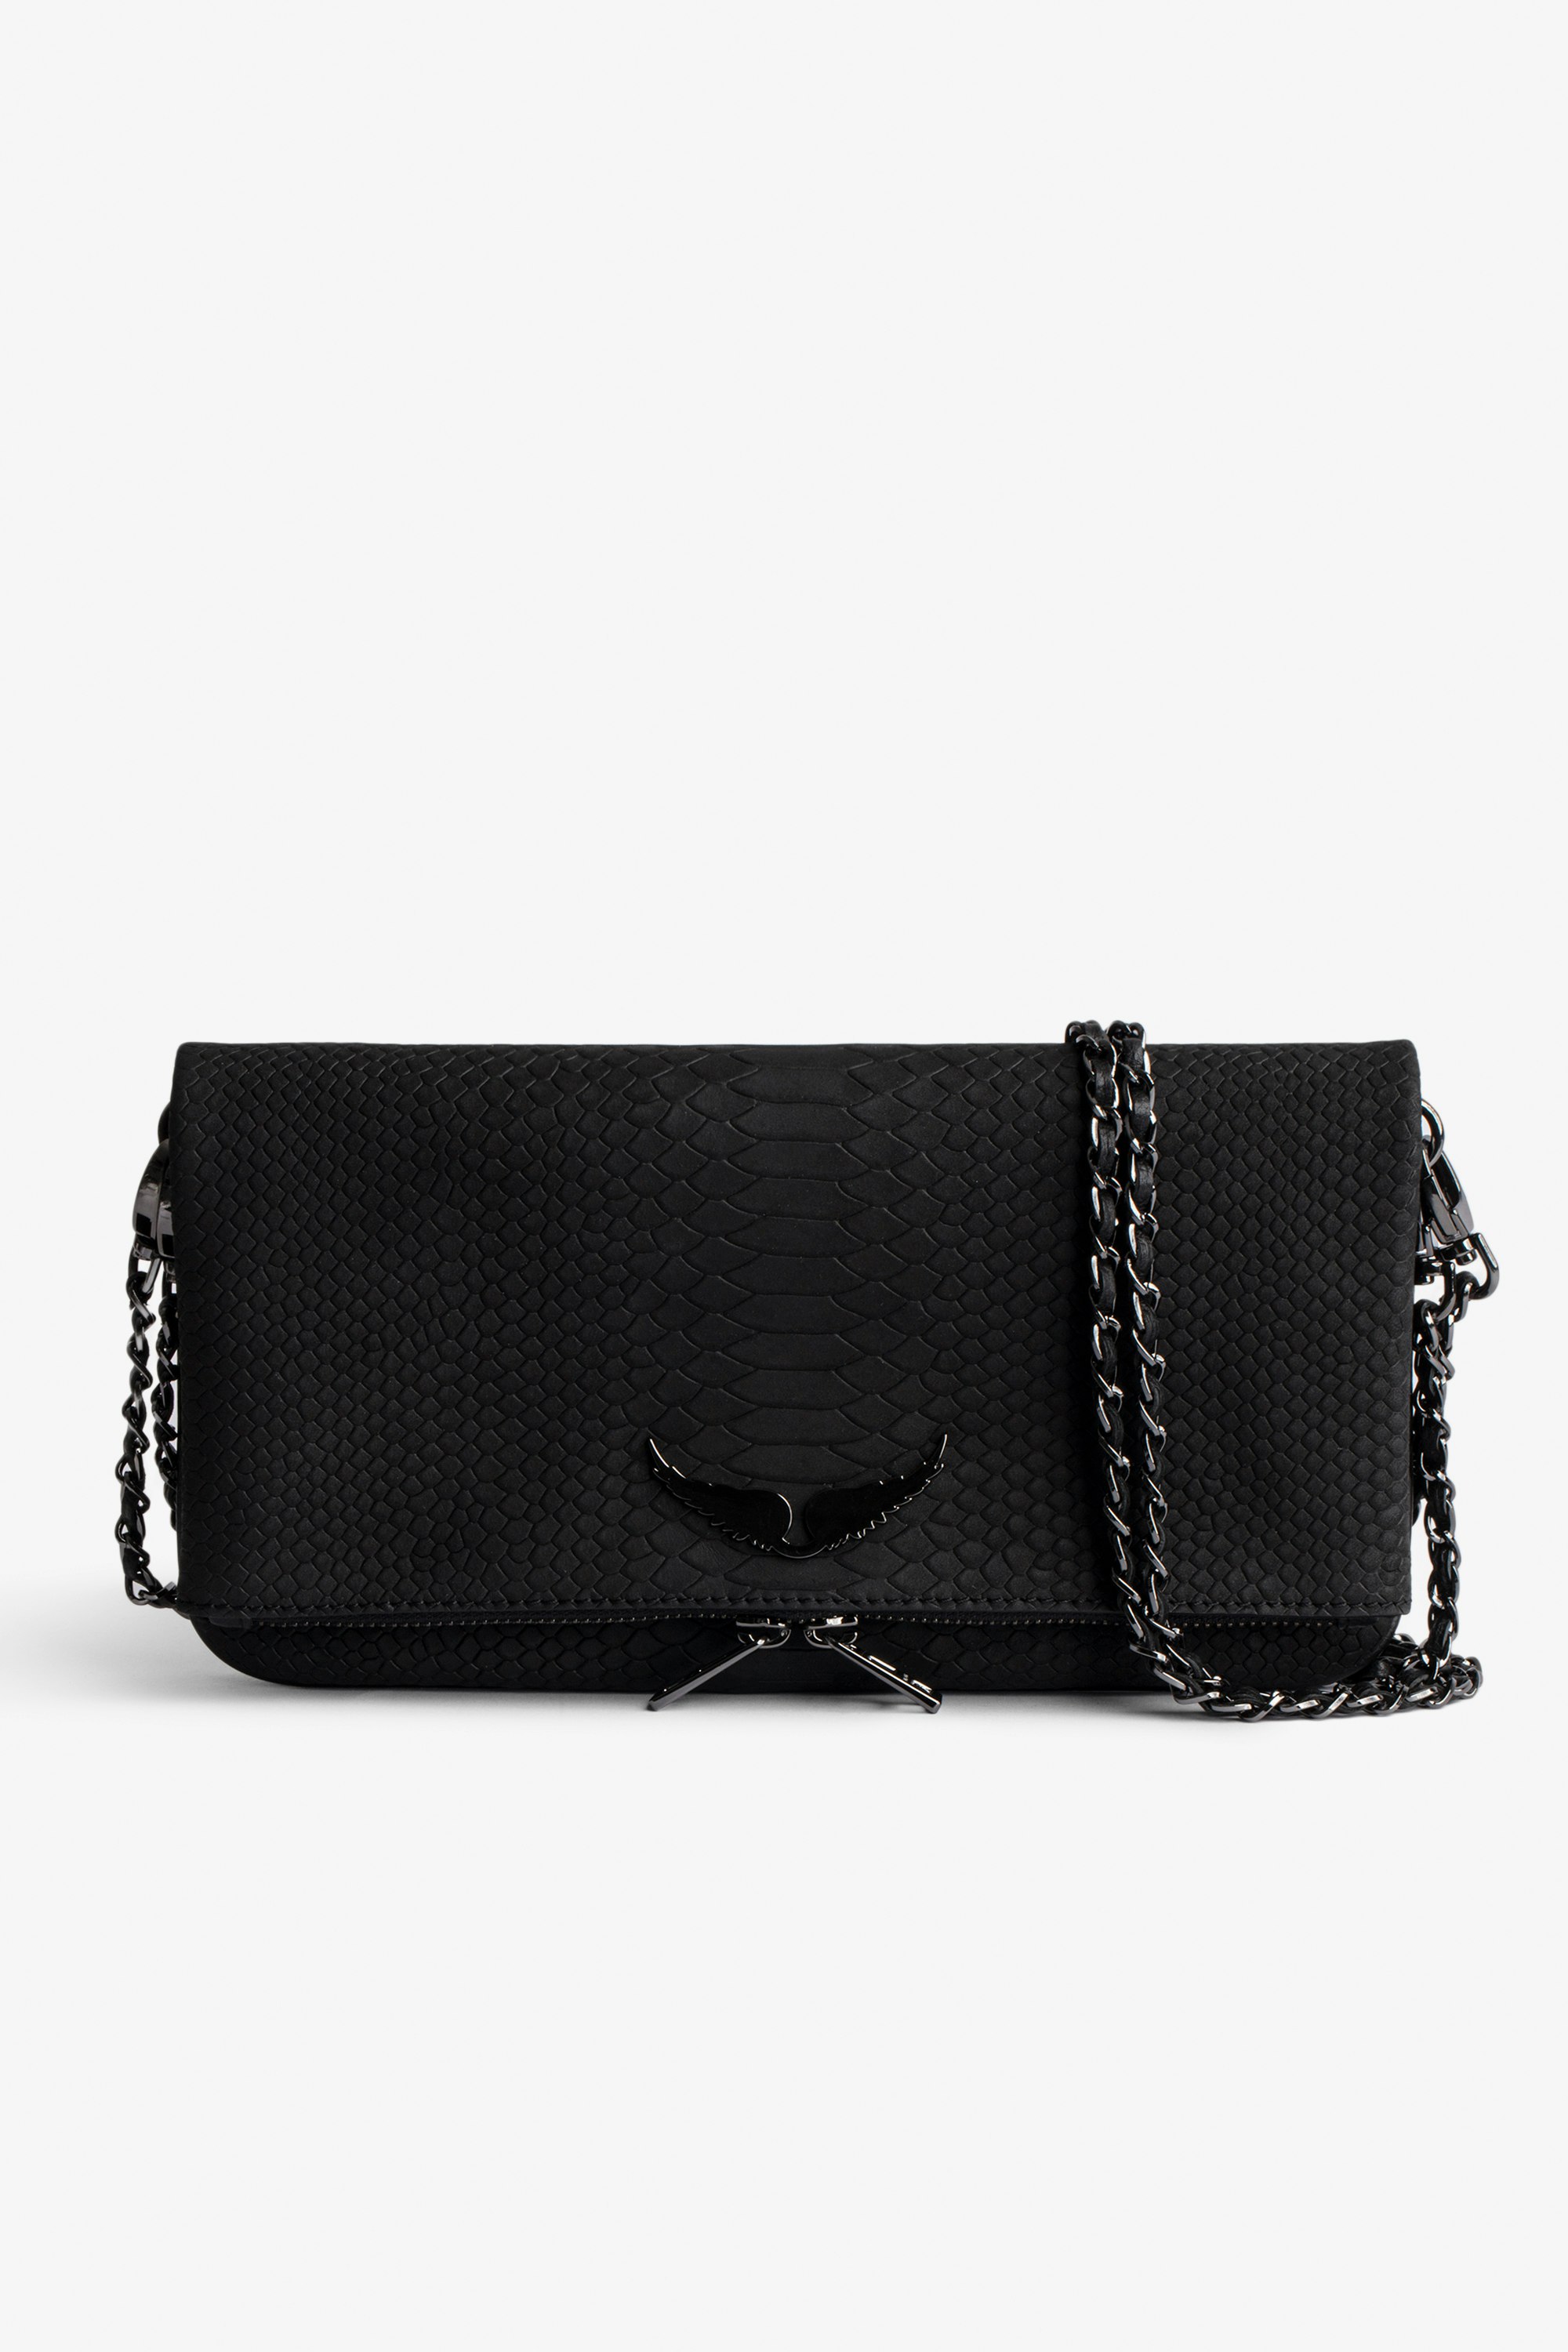 Soft Savage Rock Clutch - Women’s clutch in black python-effect leather with double leather-and-metal chain